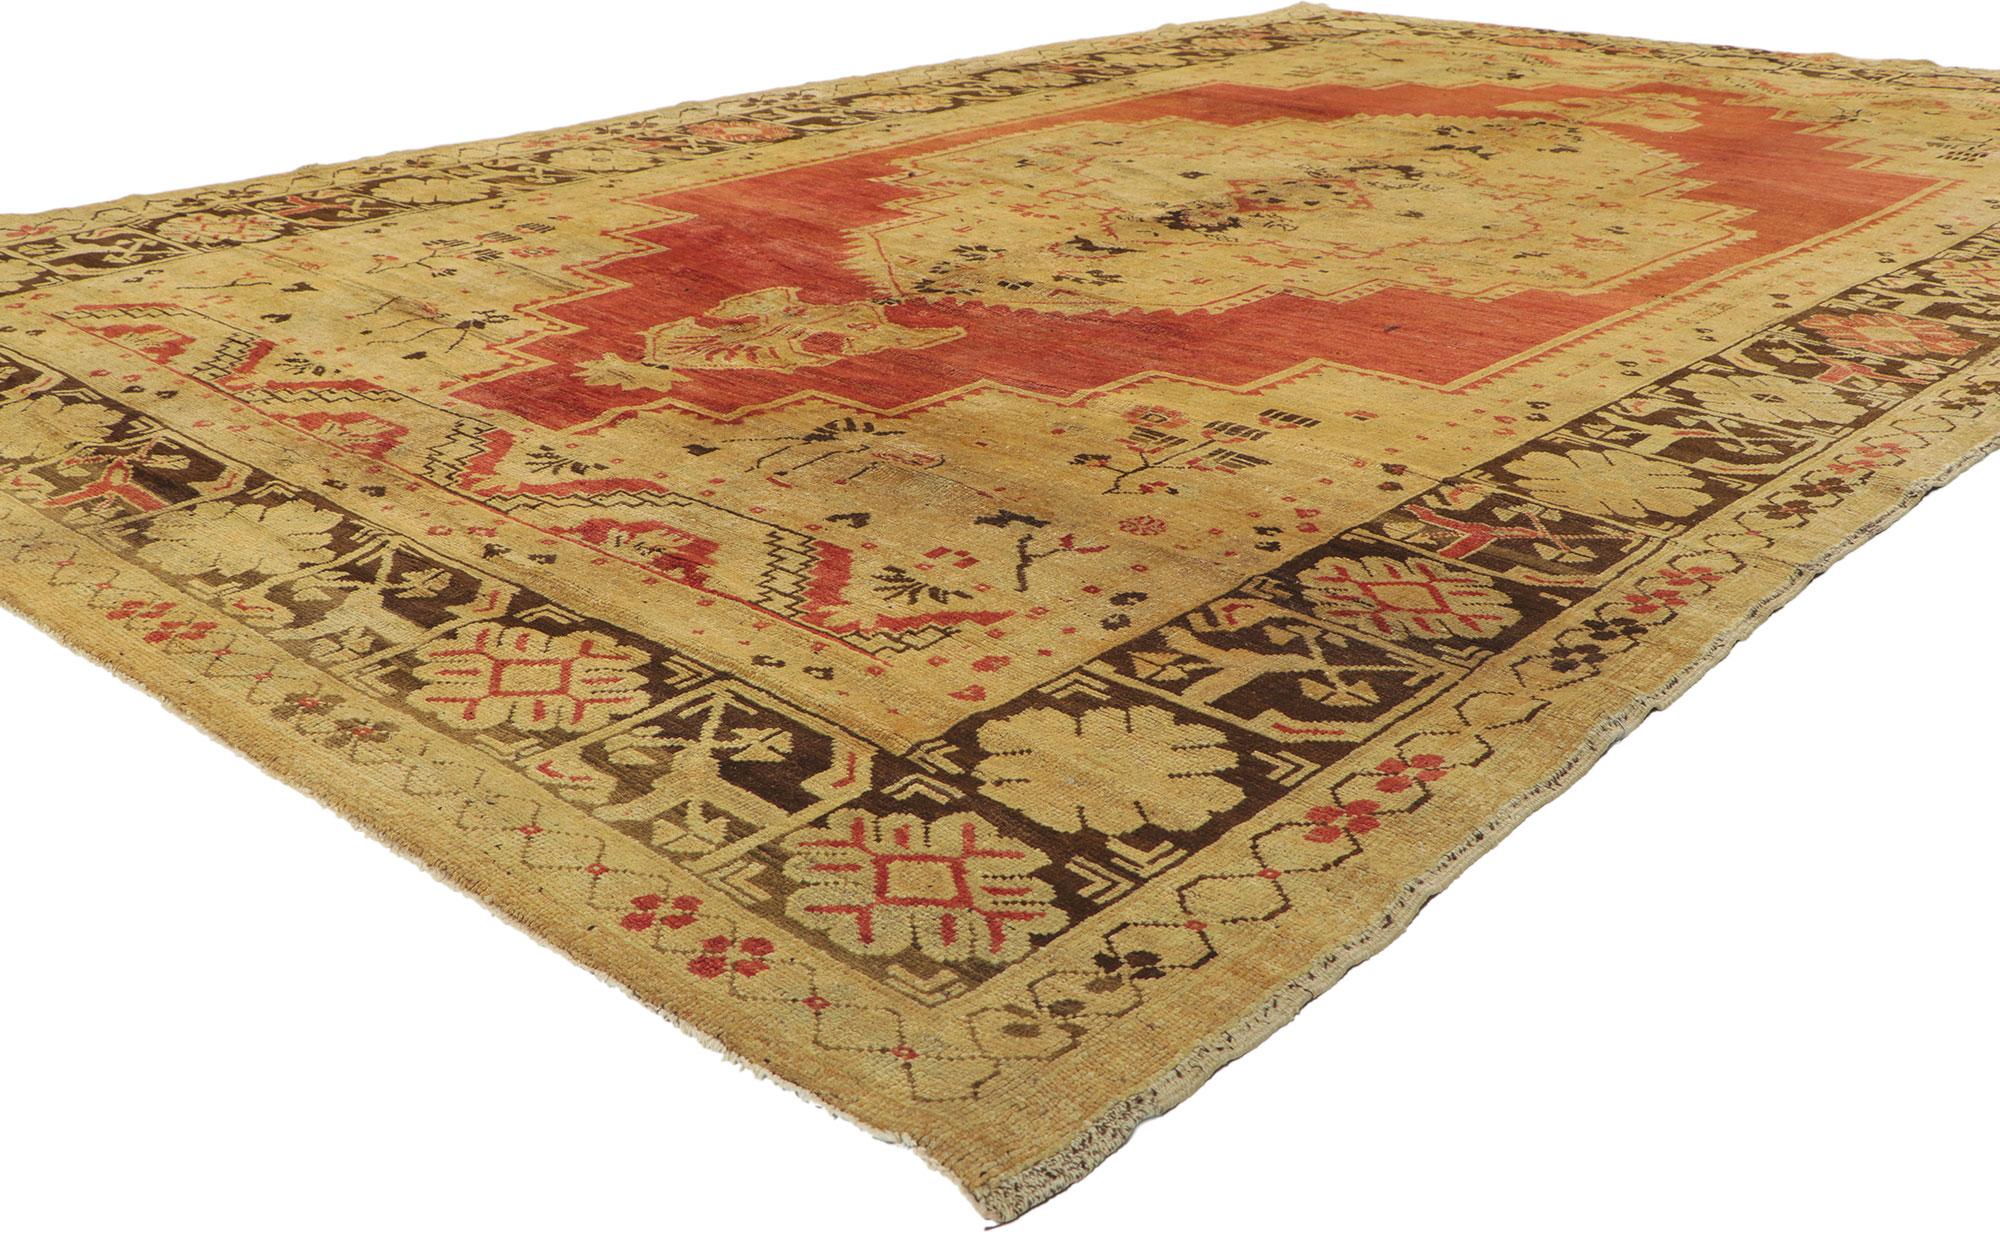 50418 Vintage Turkish Oushak Rug with Mid-Century Modern Rustic Style 07'06 x 11'10. Warm and inviting, this hand-knotted wool vintage Turkish Oushak rug beautifully embodies Mid-Century Modern style with rustic vibes. It features a large-scale